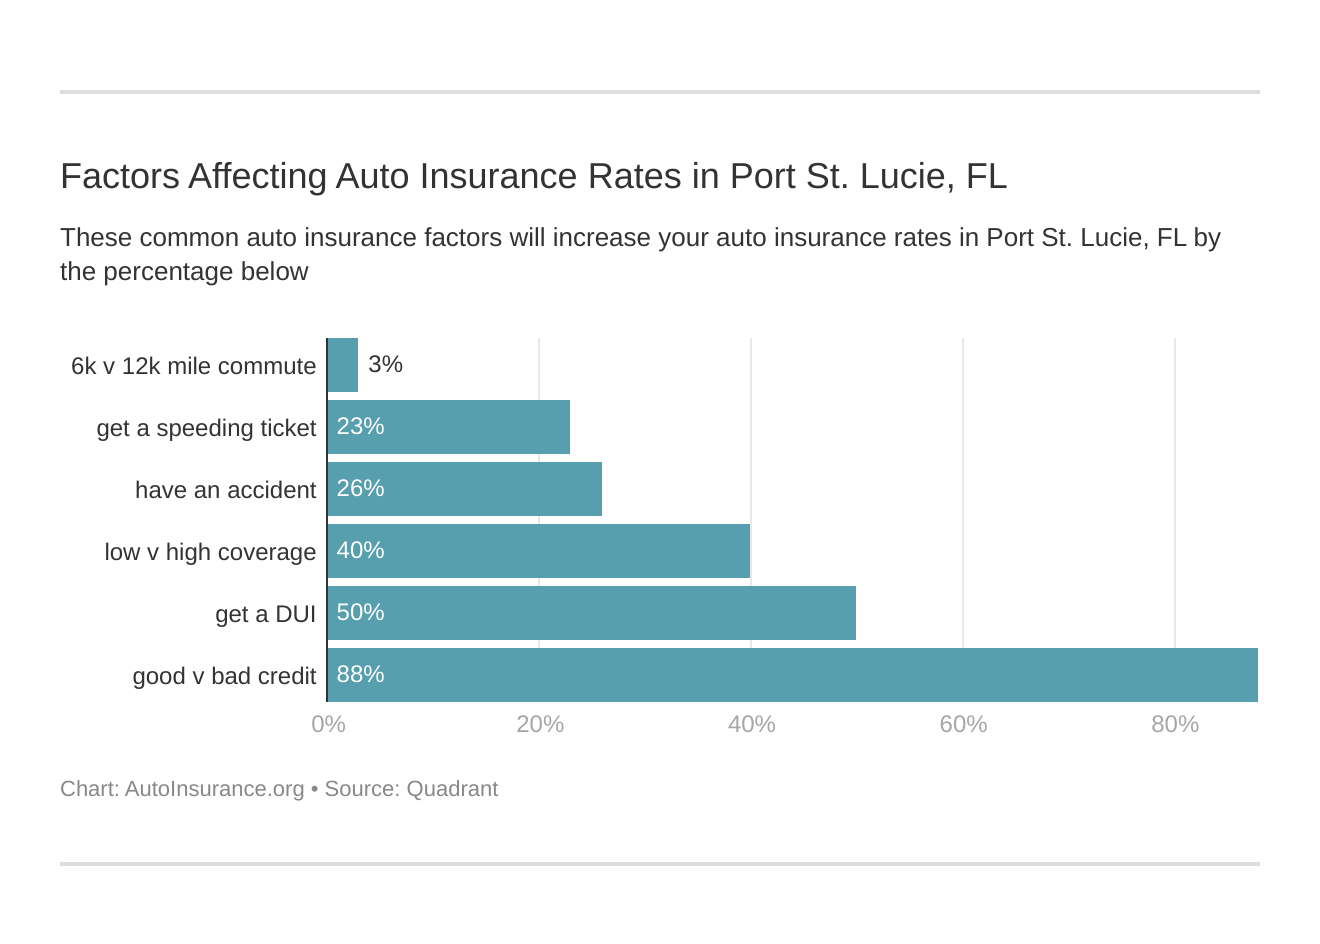 Factors Affecting Auto Insurance Rates in Port St. Lucie, FL